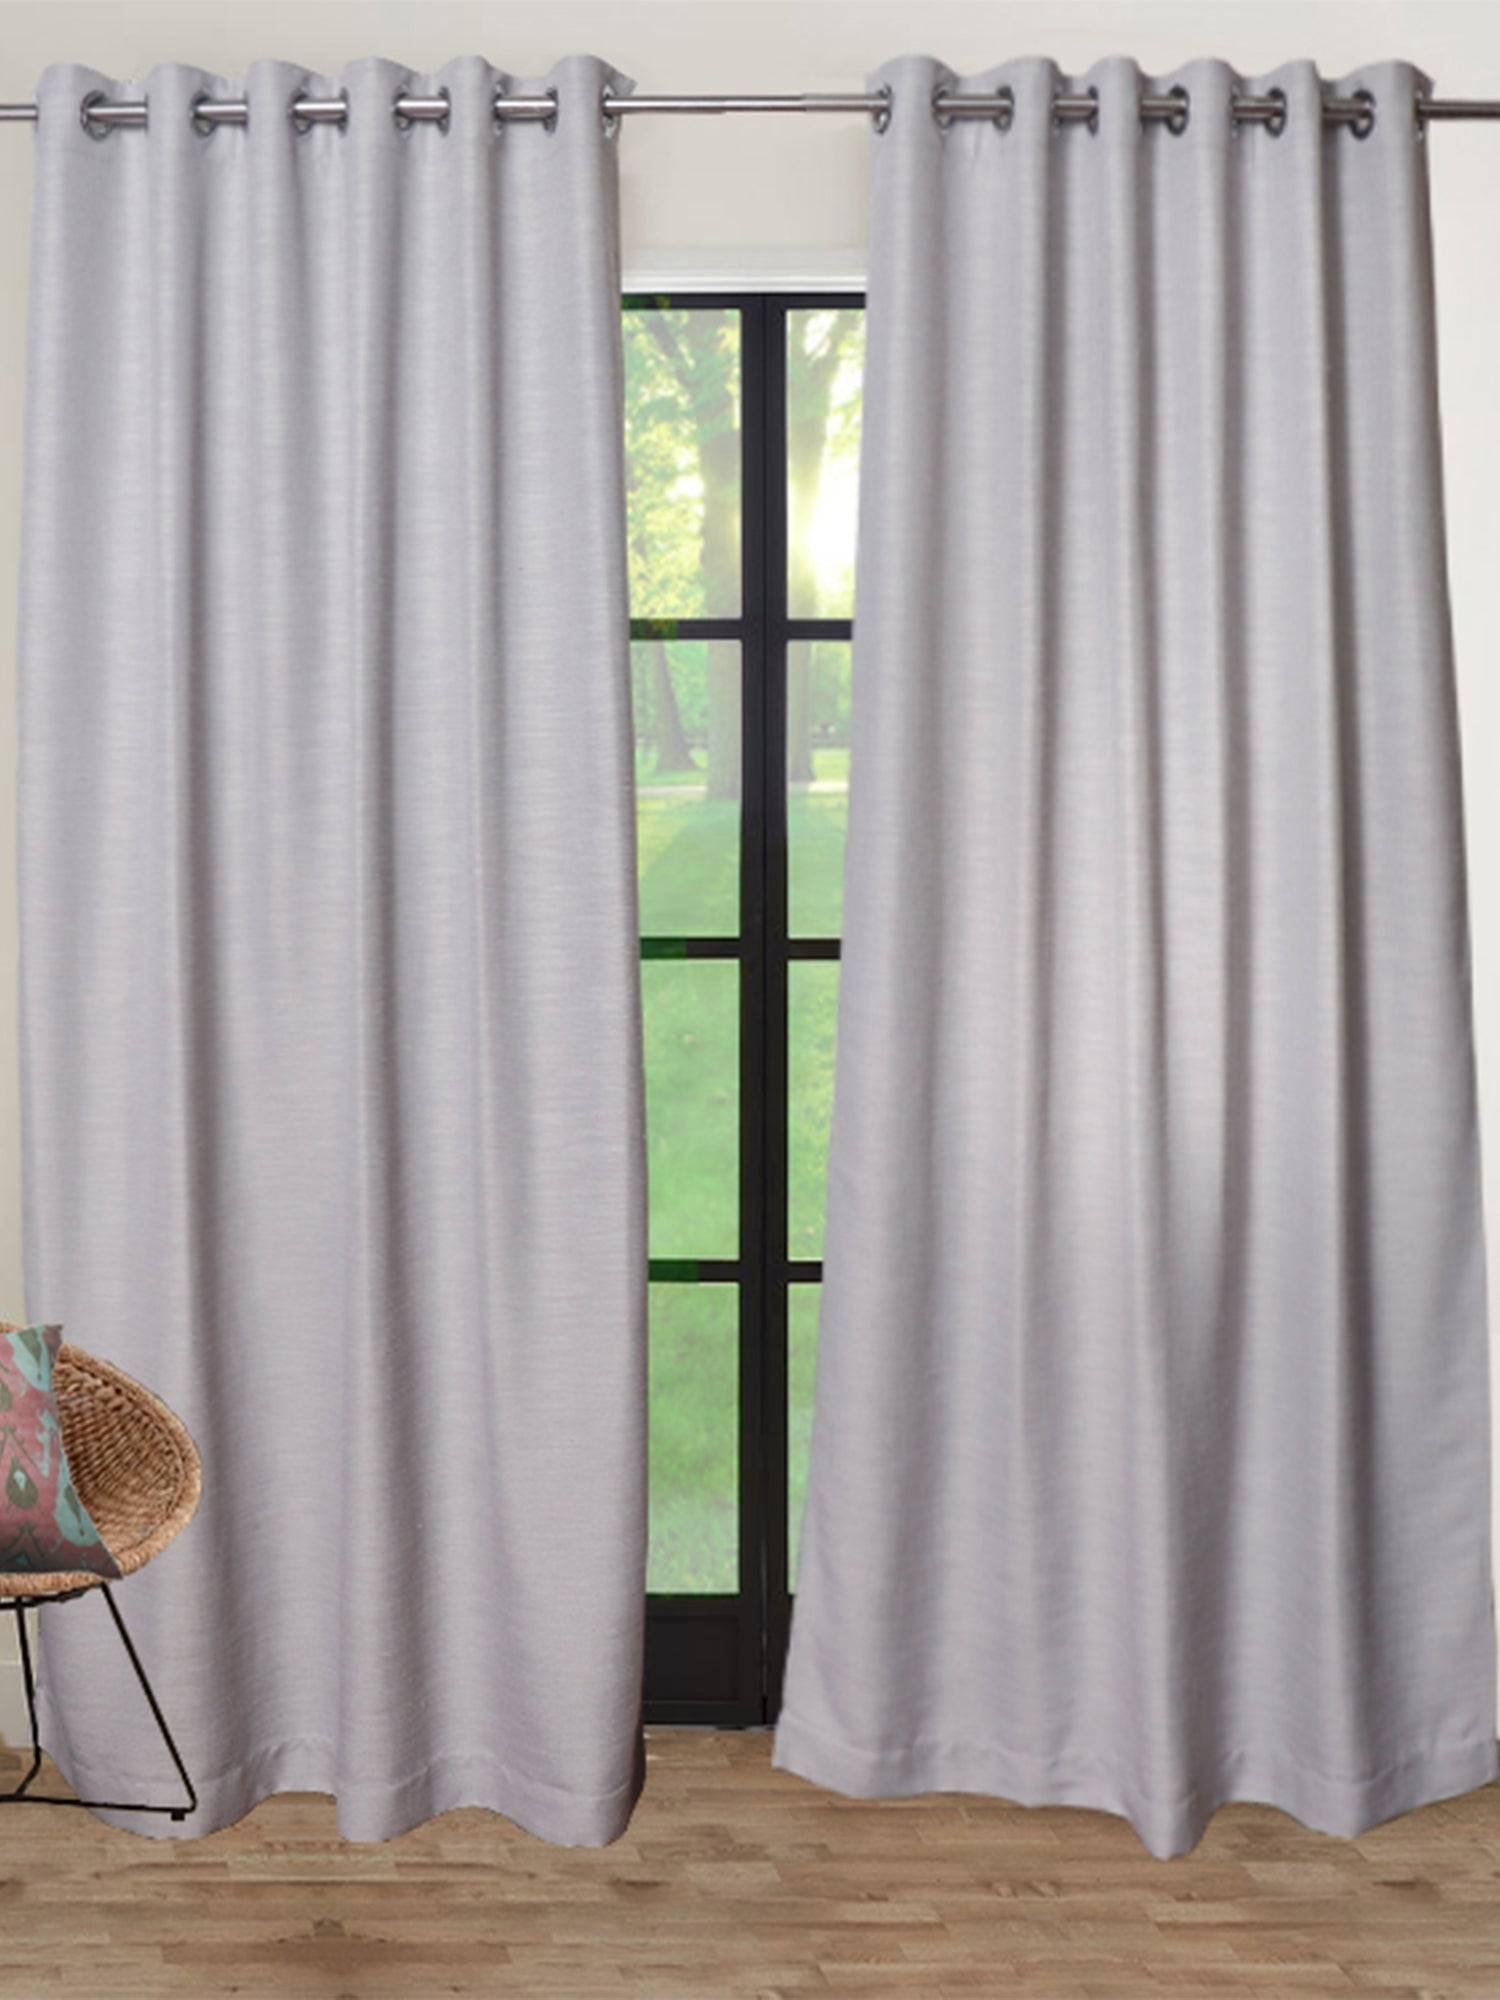 Door Curtain Cotton Blend Solid Grey (Eyelet) - 54x84 inches